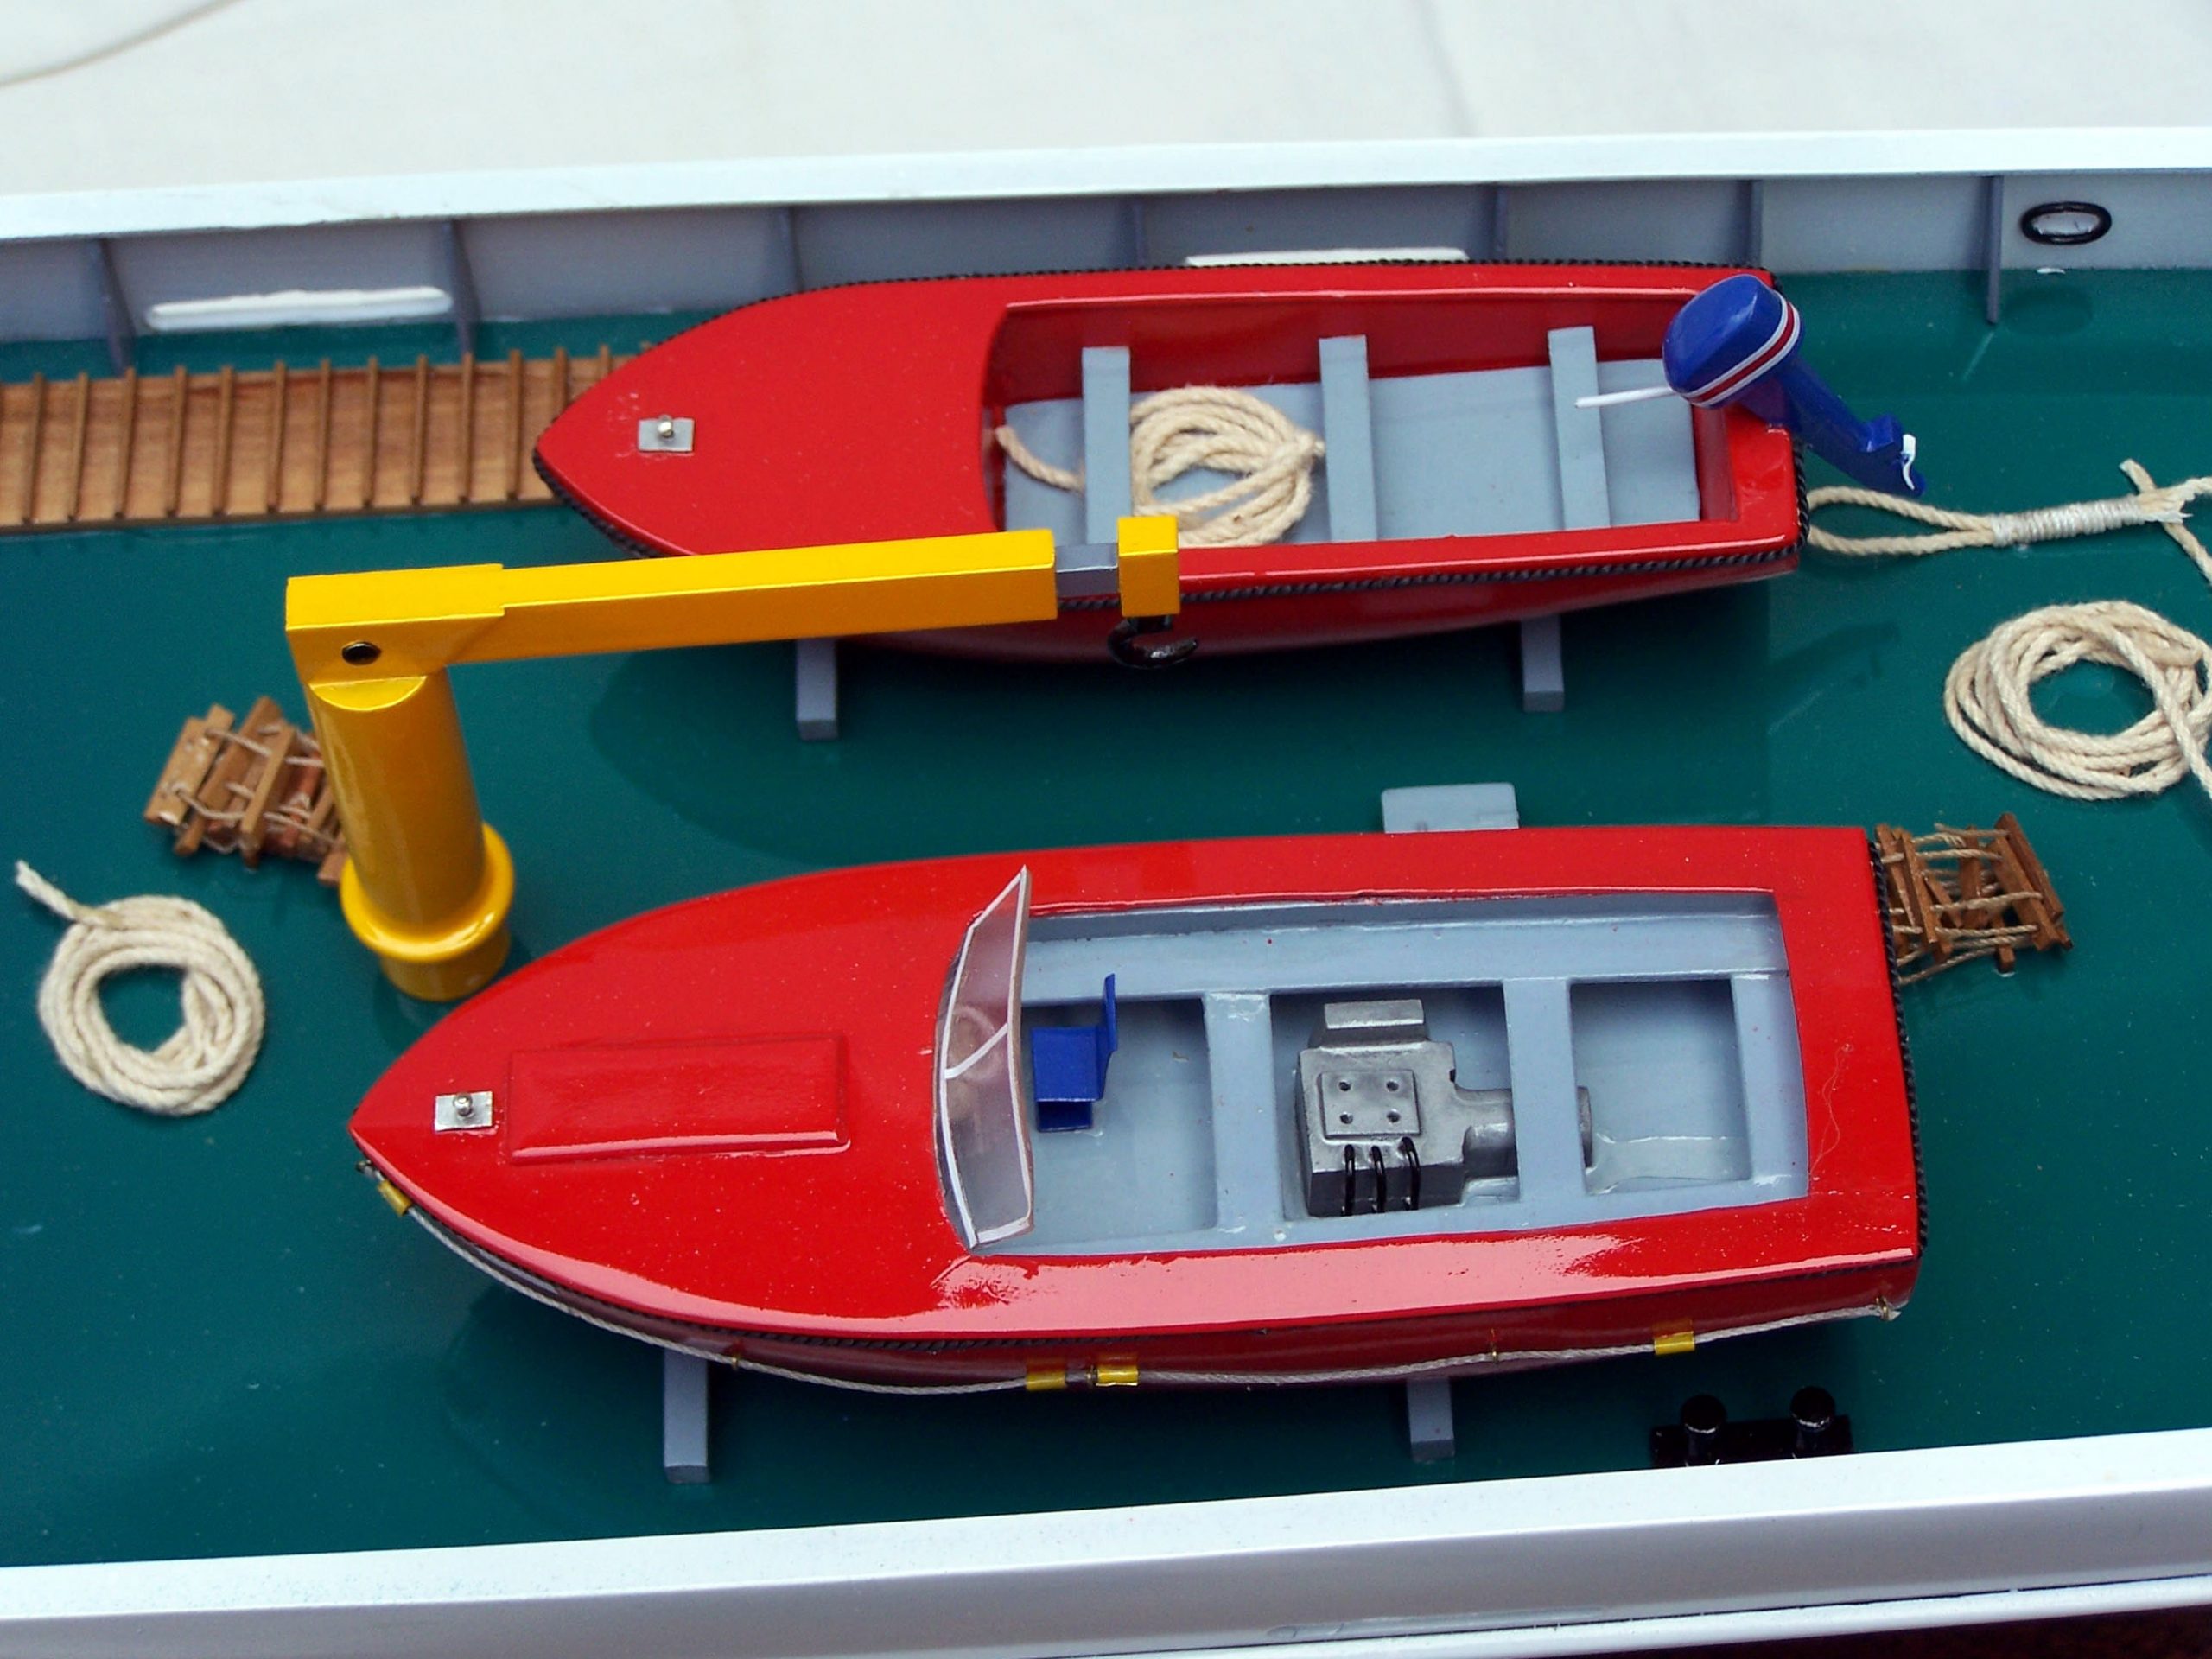 Ship model and all kinds of engineering machinery model making